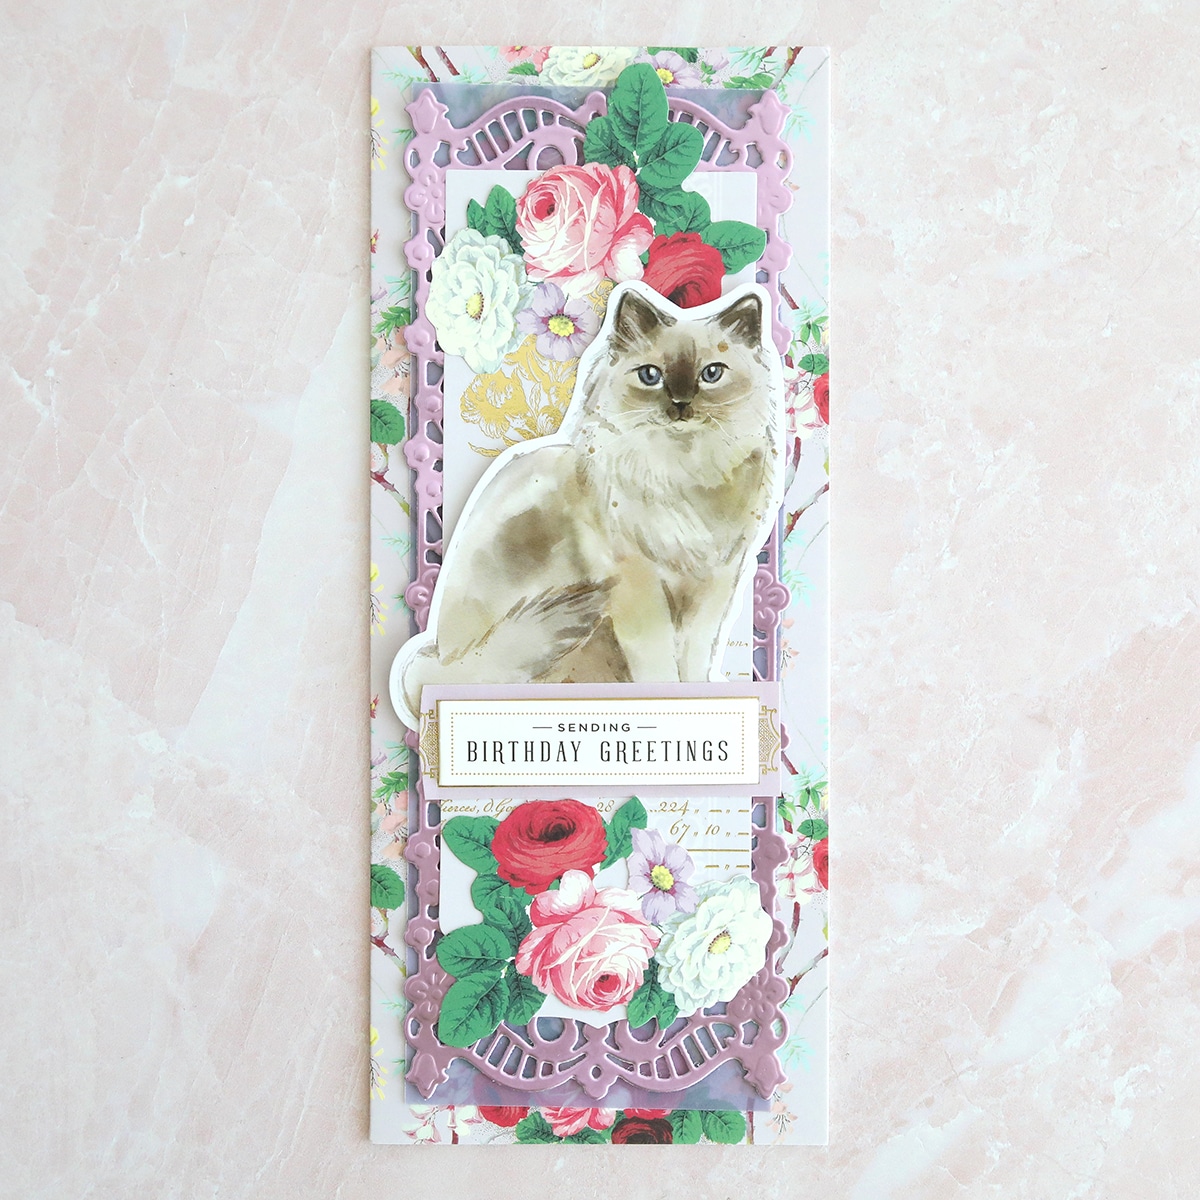 a bookmark with a cat and flowers on it.